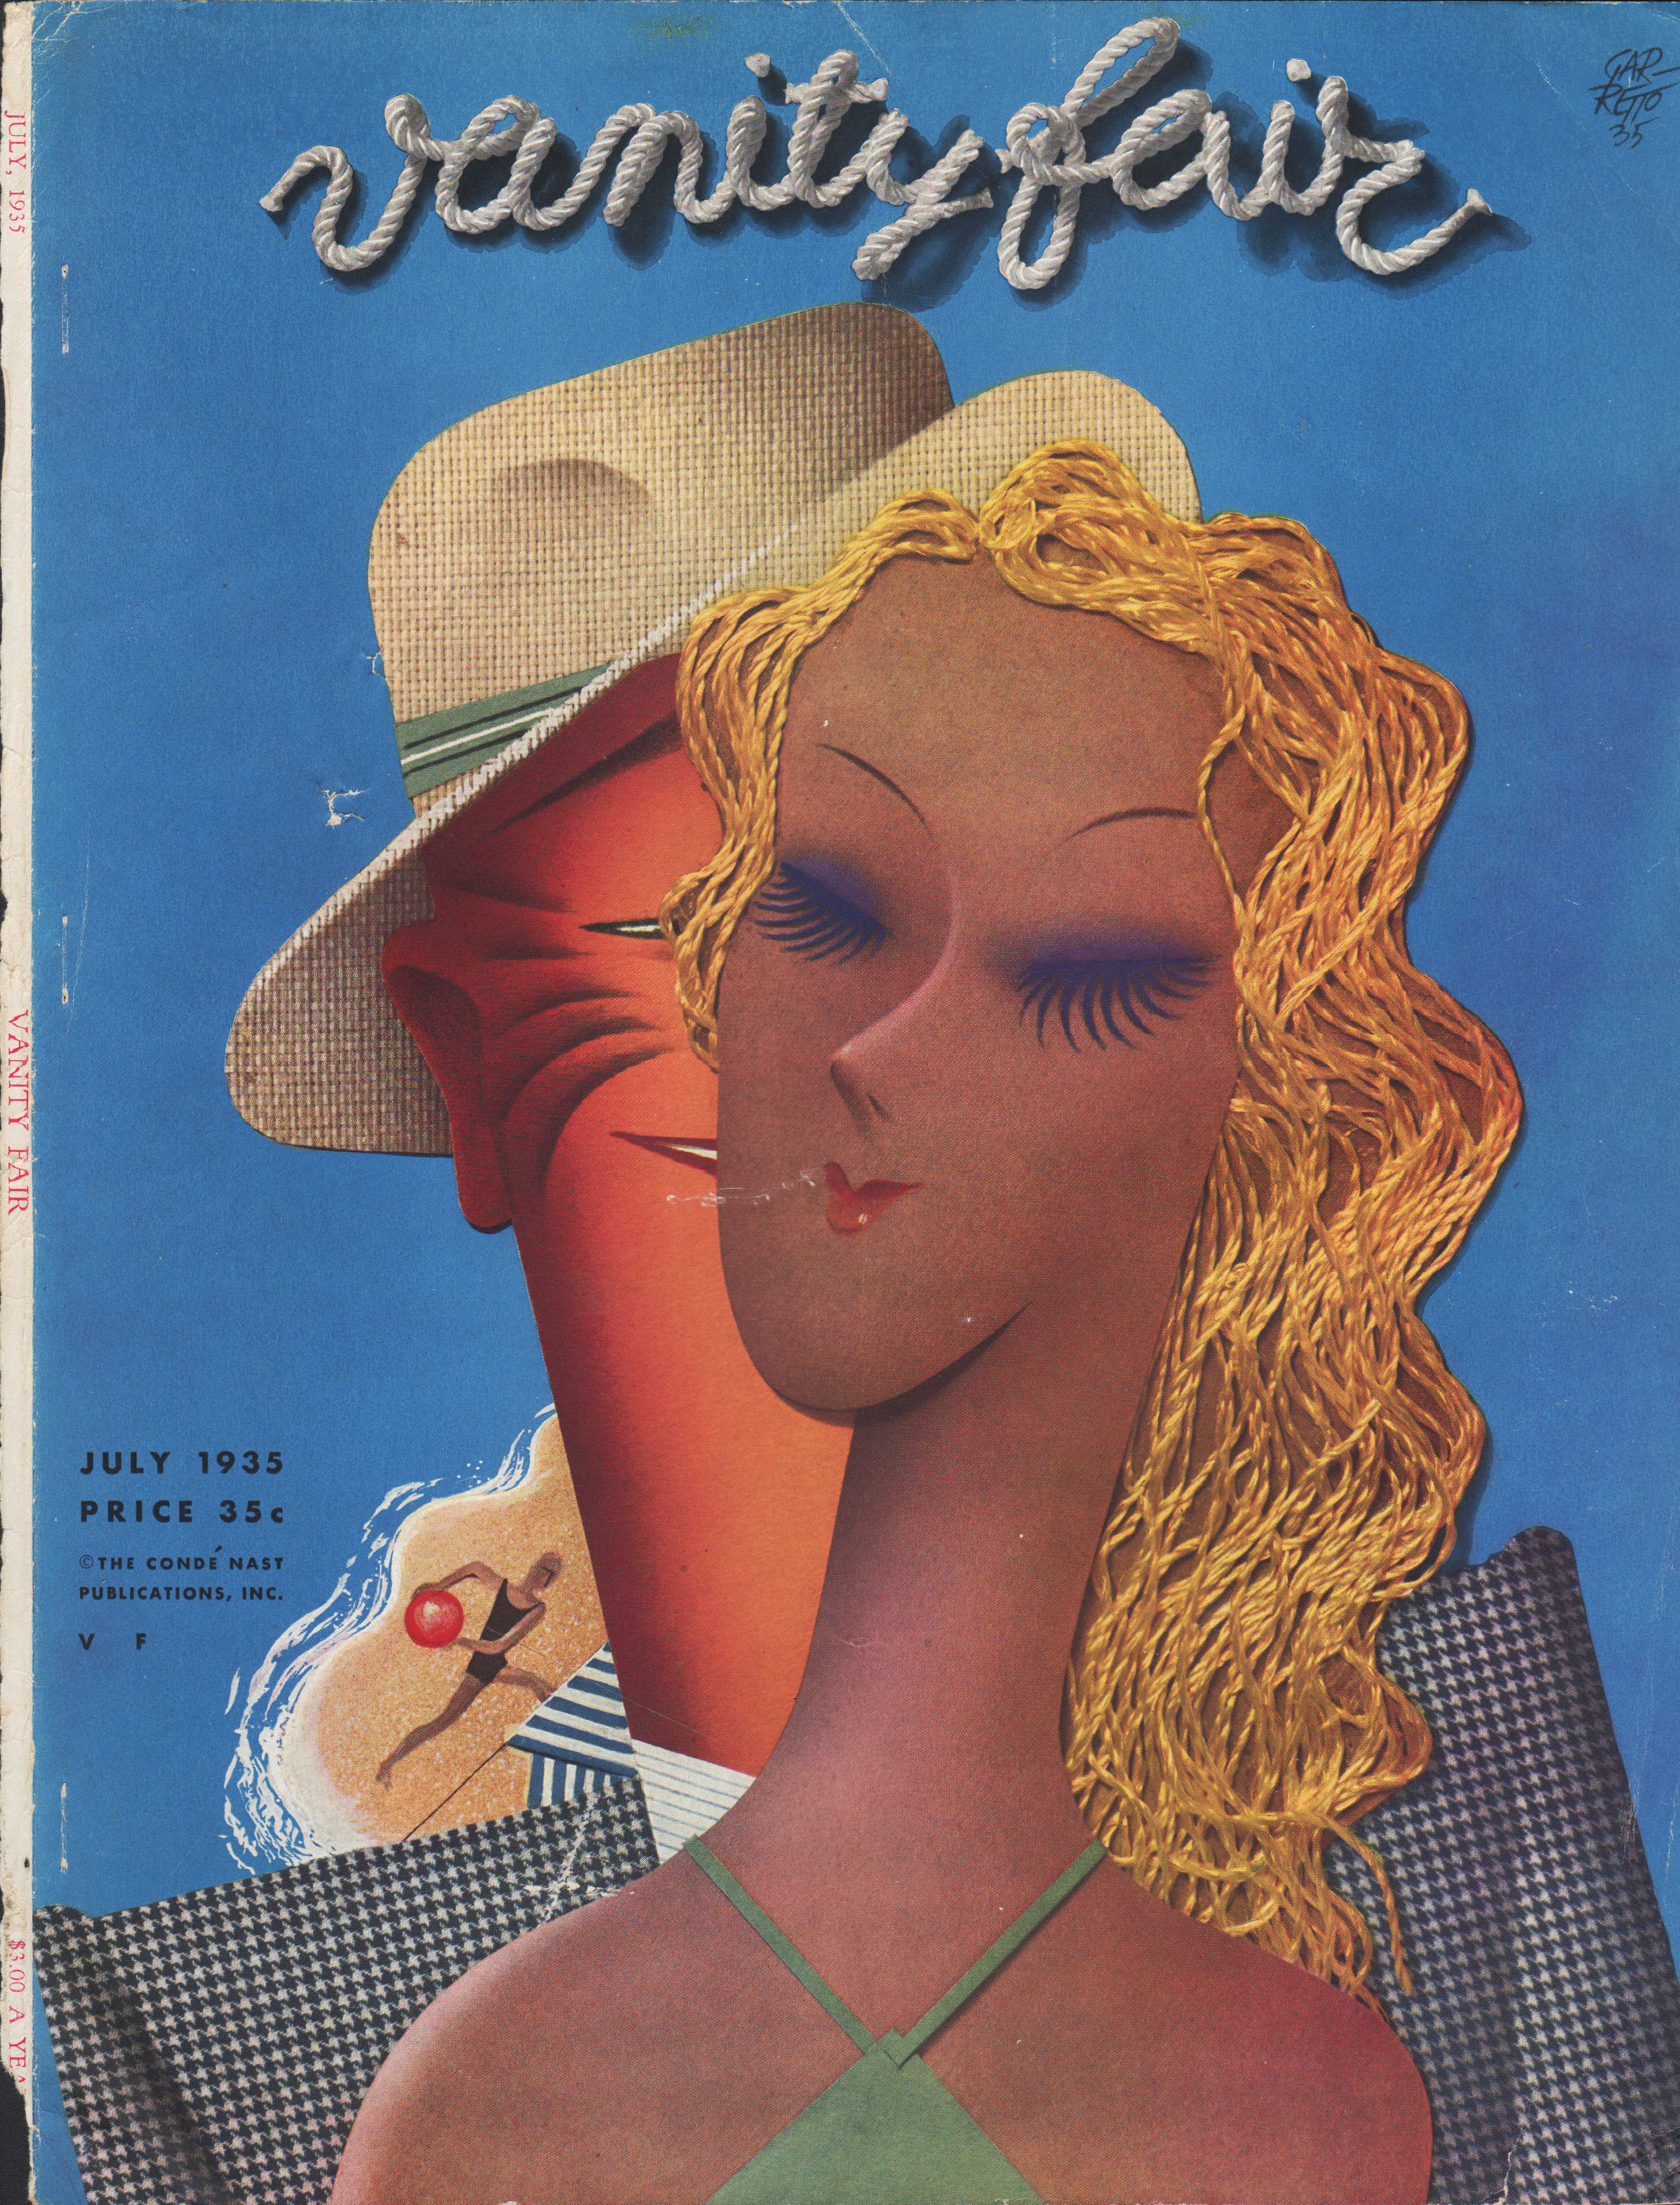 Vanity Fair Magazine, July, 1935 - Cover Only